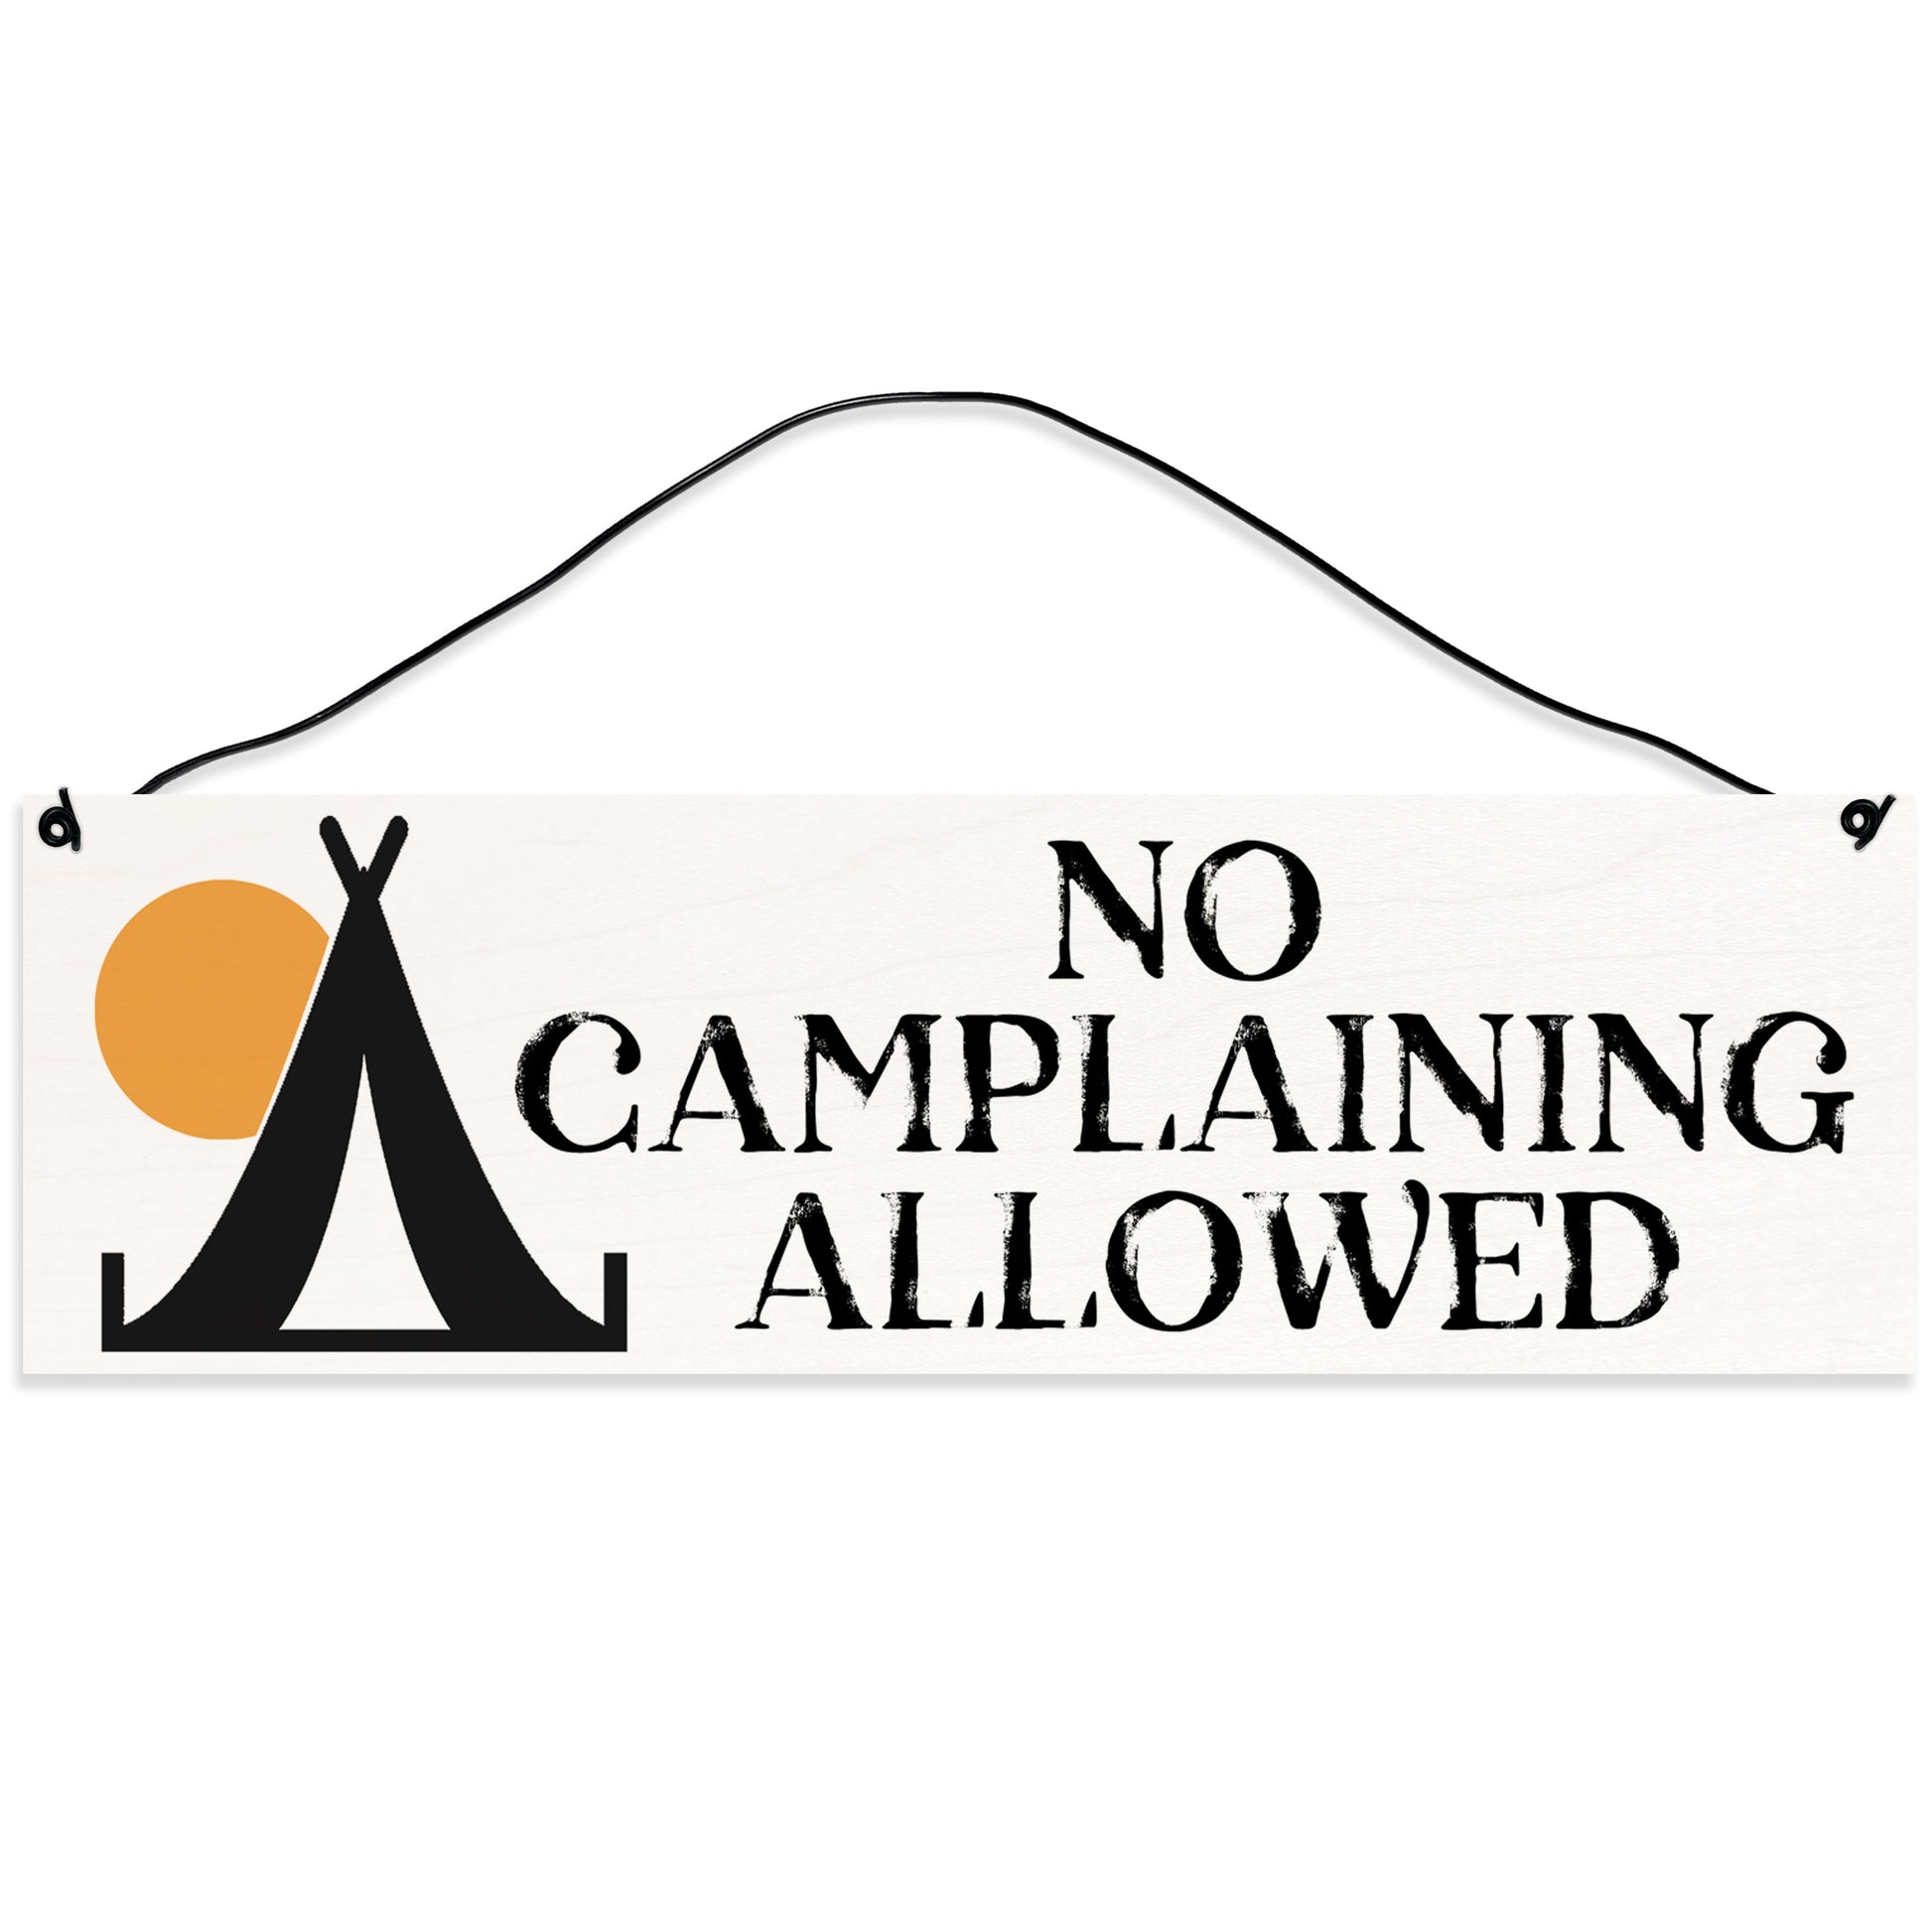 Sawyer's Mill - No Camplaining Allowed. Wood Sign for Home or Office. Measures 3x10 inches.